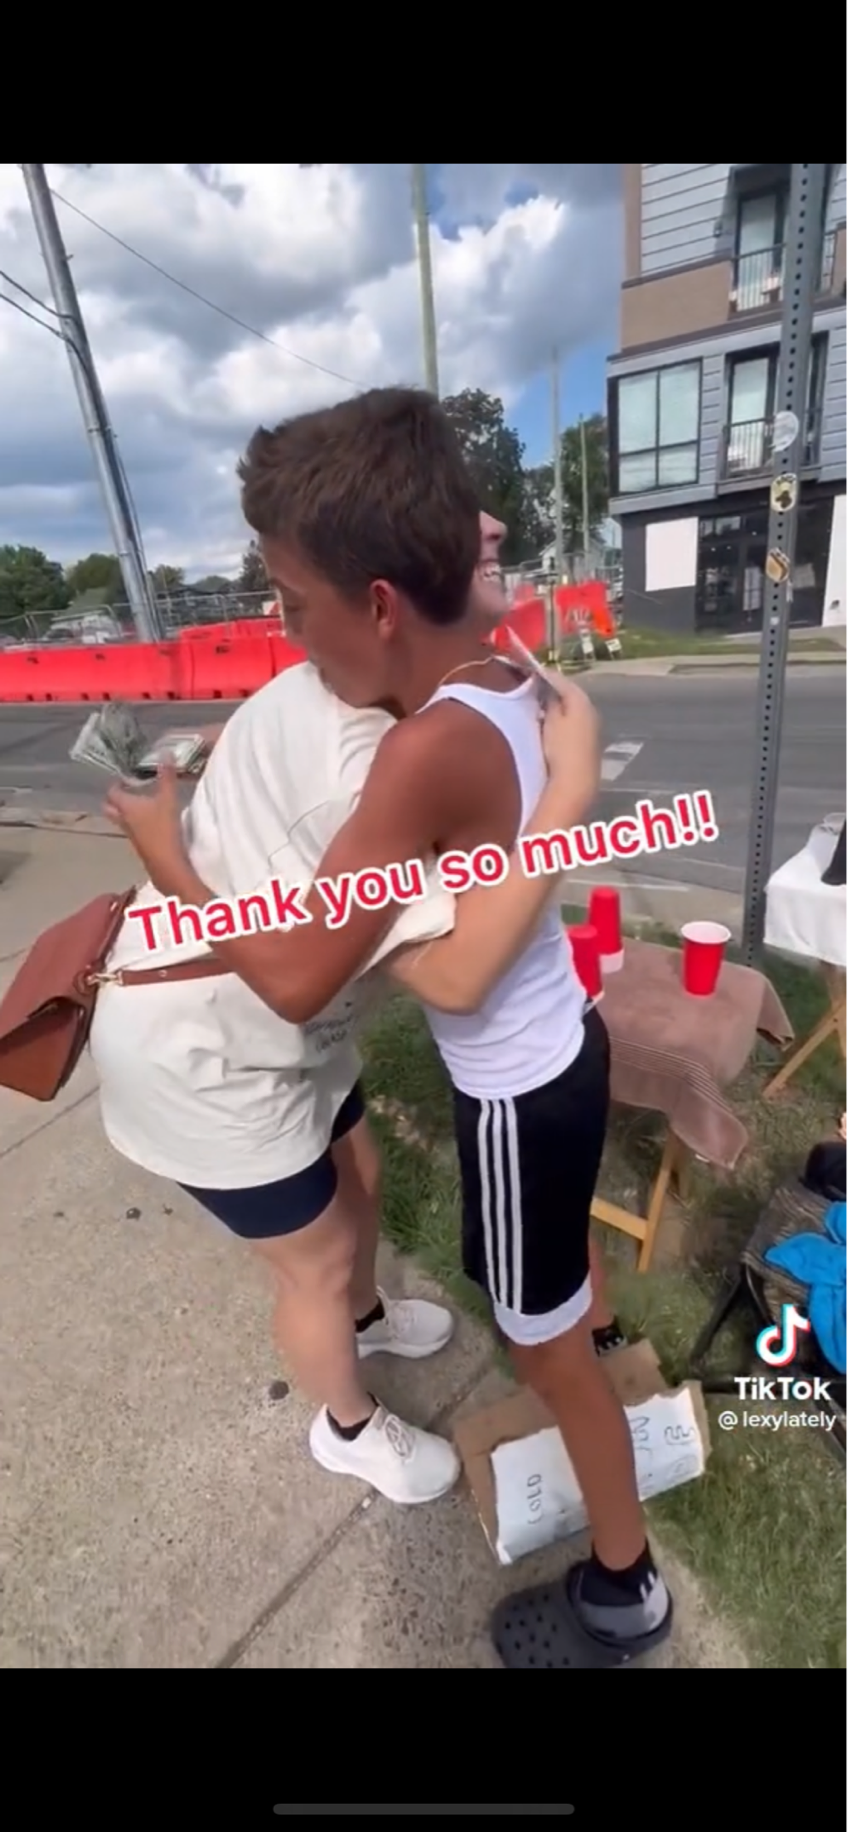 A screen grab of a TikTok video where Nashville "serial tipper" Lexy Burke bought a $3 glass of lemonade from 11-year-old Niko for $1,100 on July 27, 2022, along 12 South. Niko hugs Lexy while clutching 11 $100 bills.